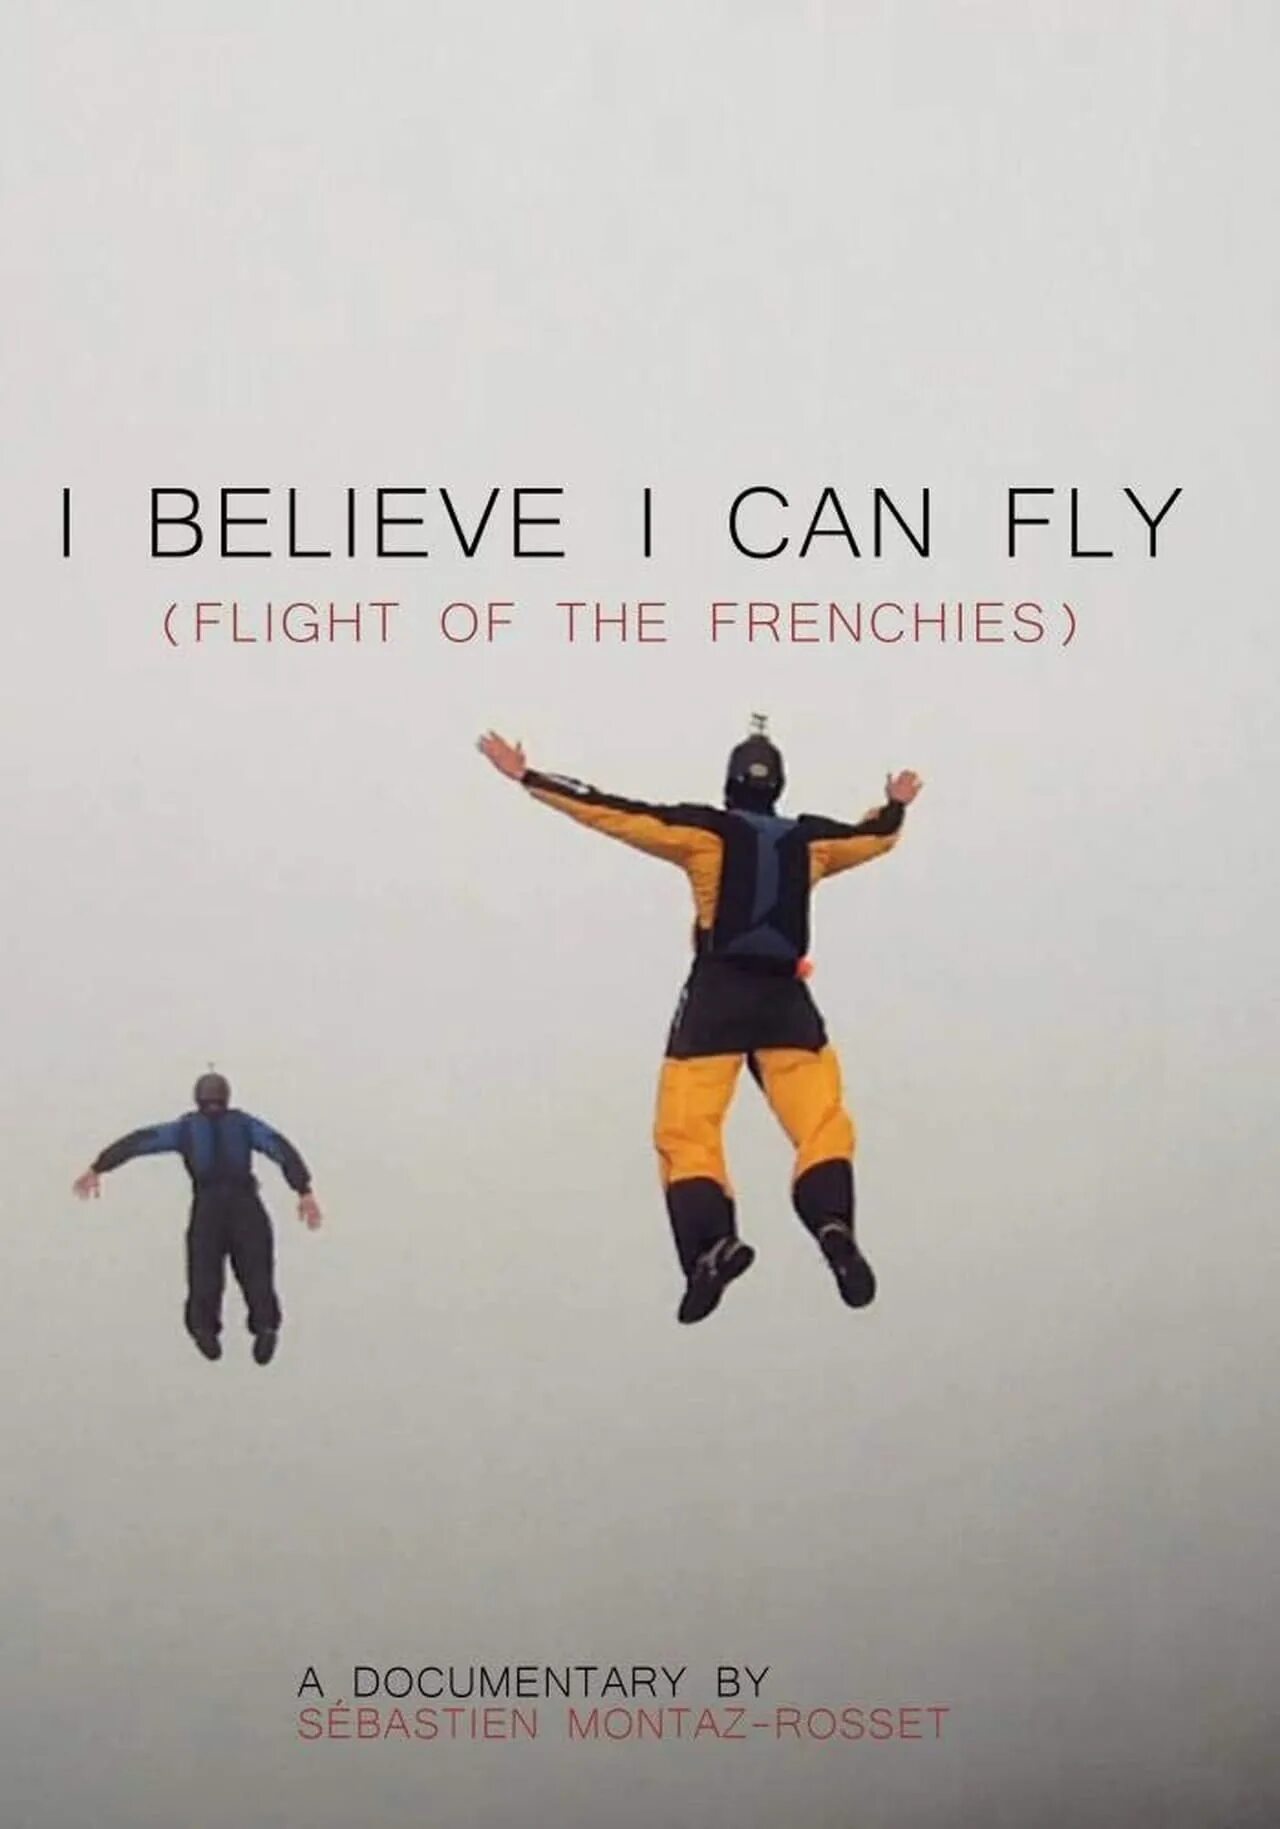 I believe i can текст. I can Fly. A believe a can Fly. I believe i can can Fly. I believe i can Fly исполнитель.